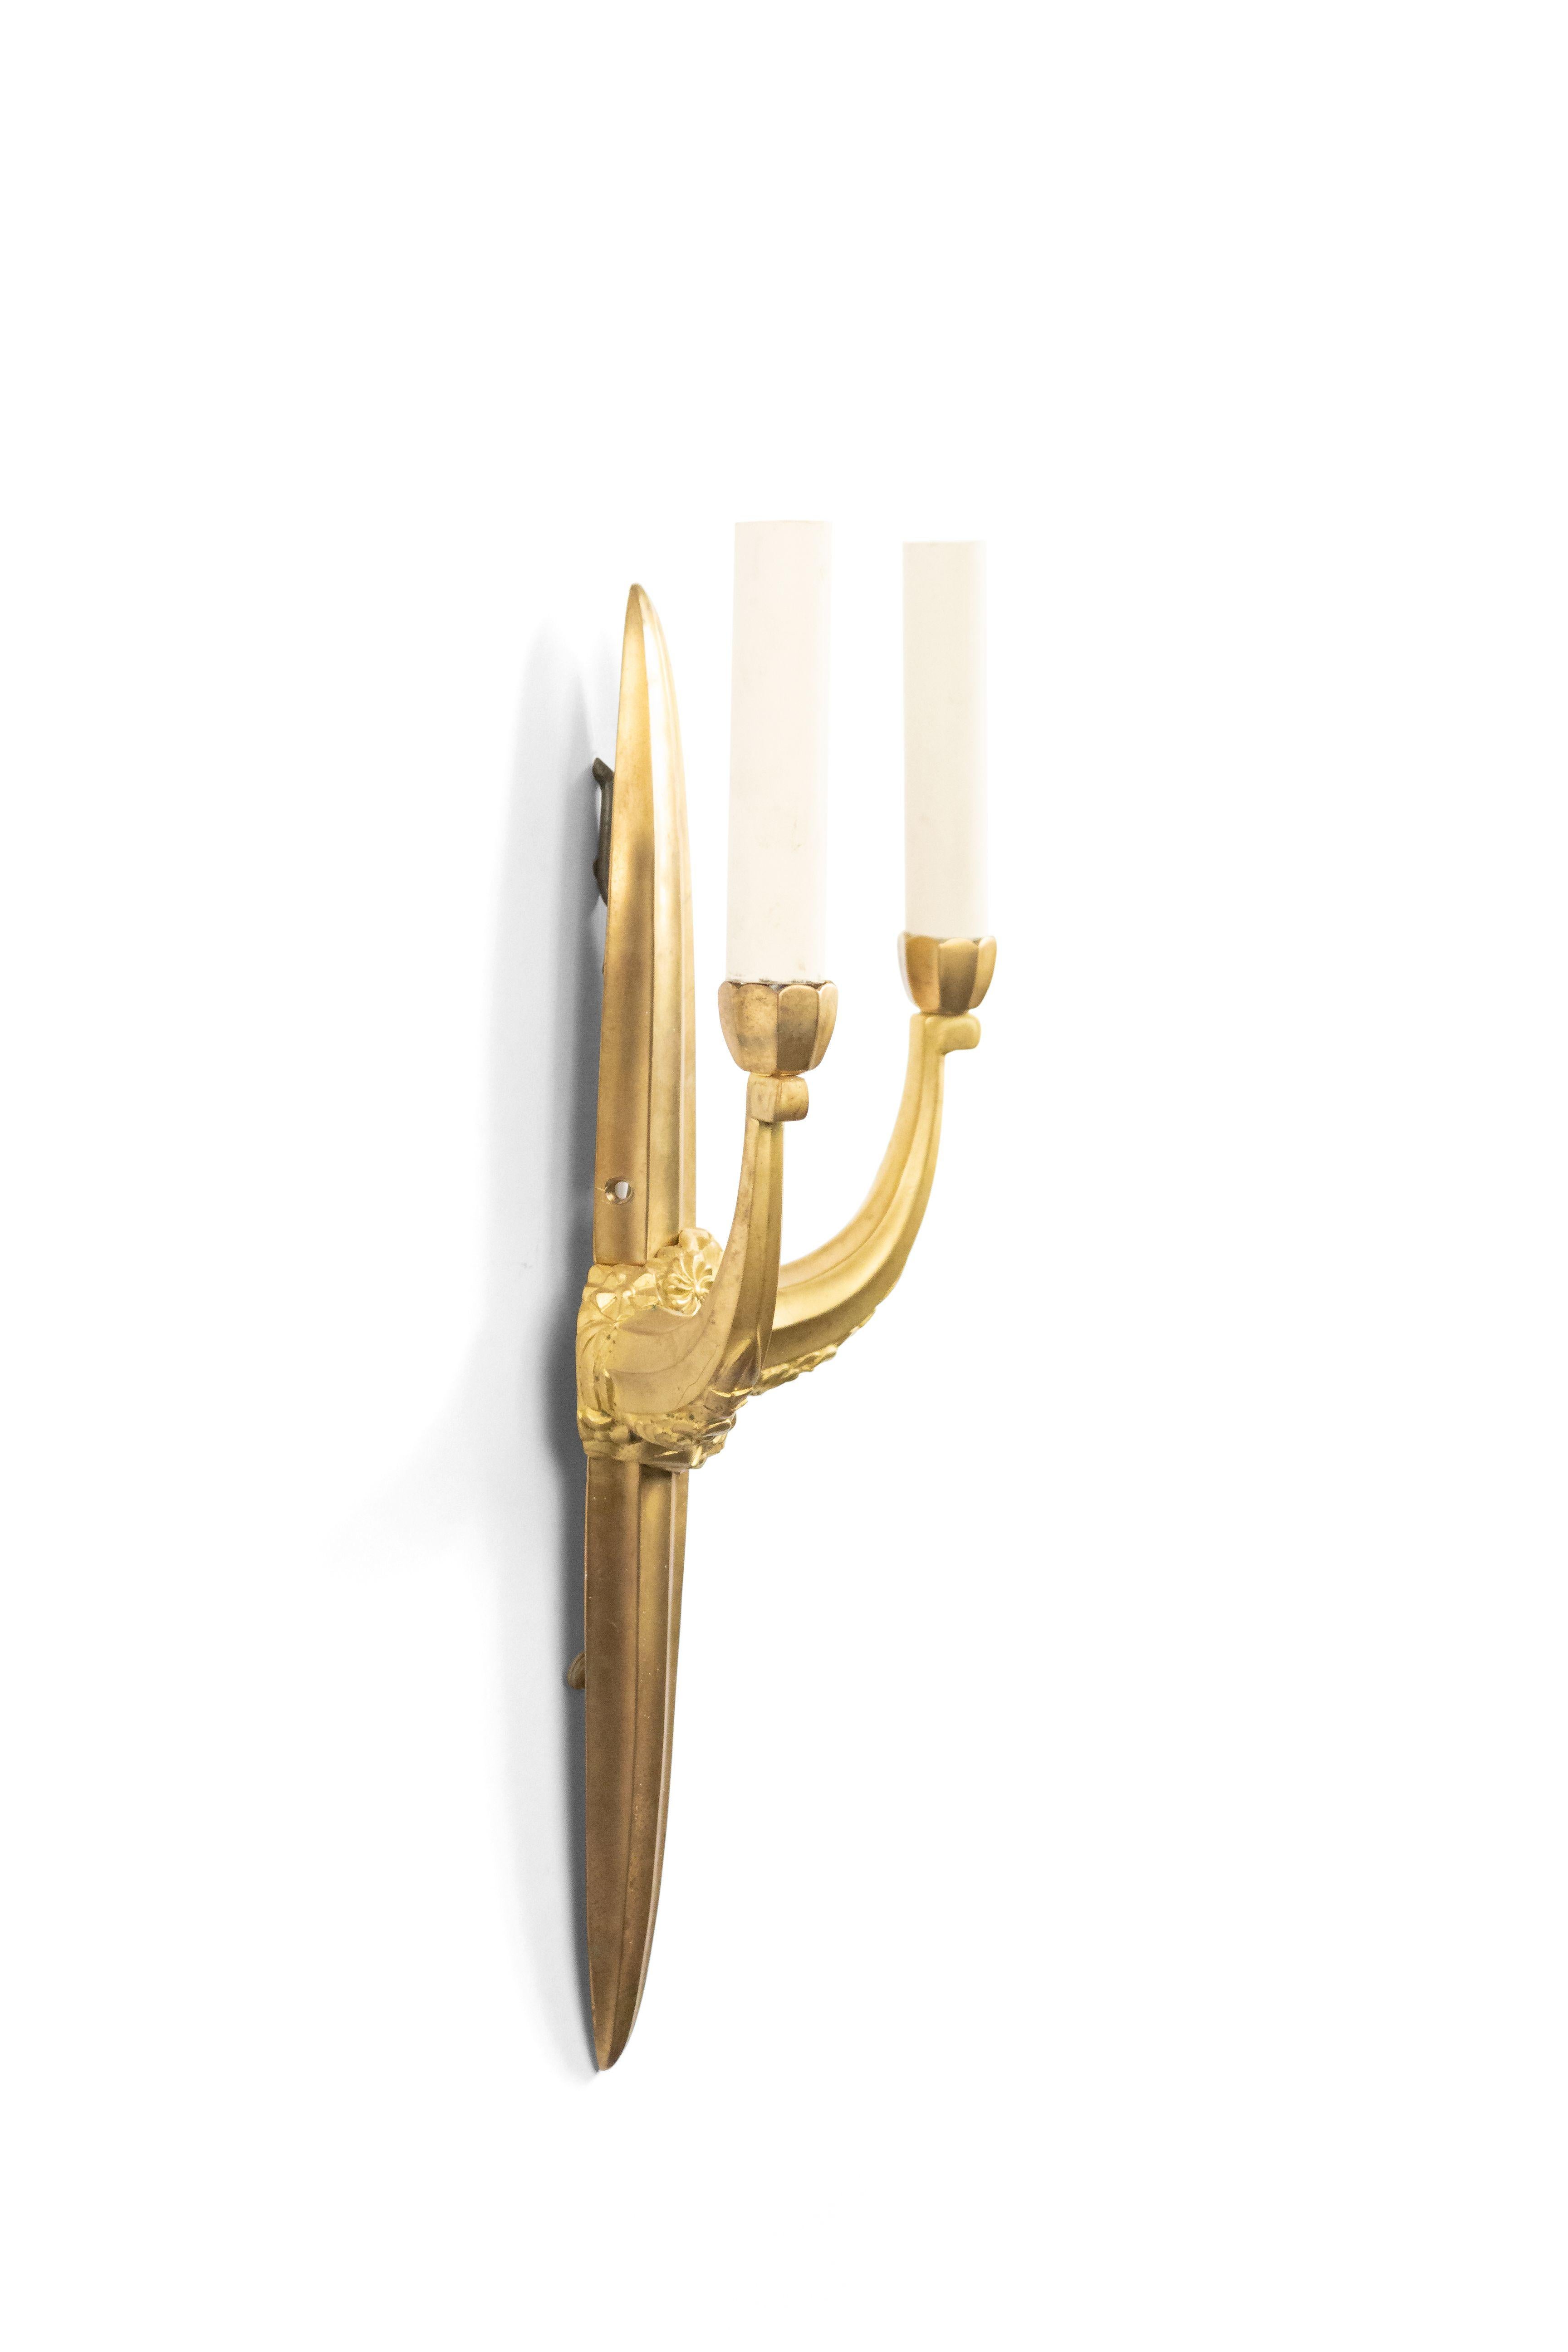 French Art Deco Style Bronze Dore Wall Sconces 'Manner of Sue et Mare' For Sale 2